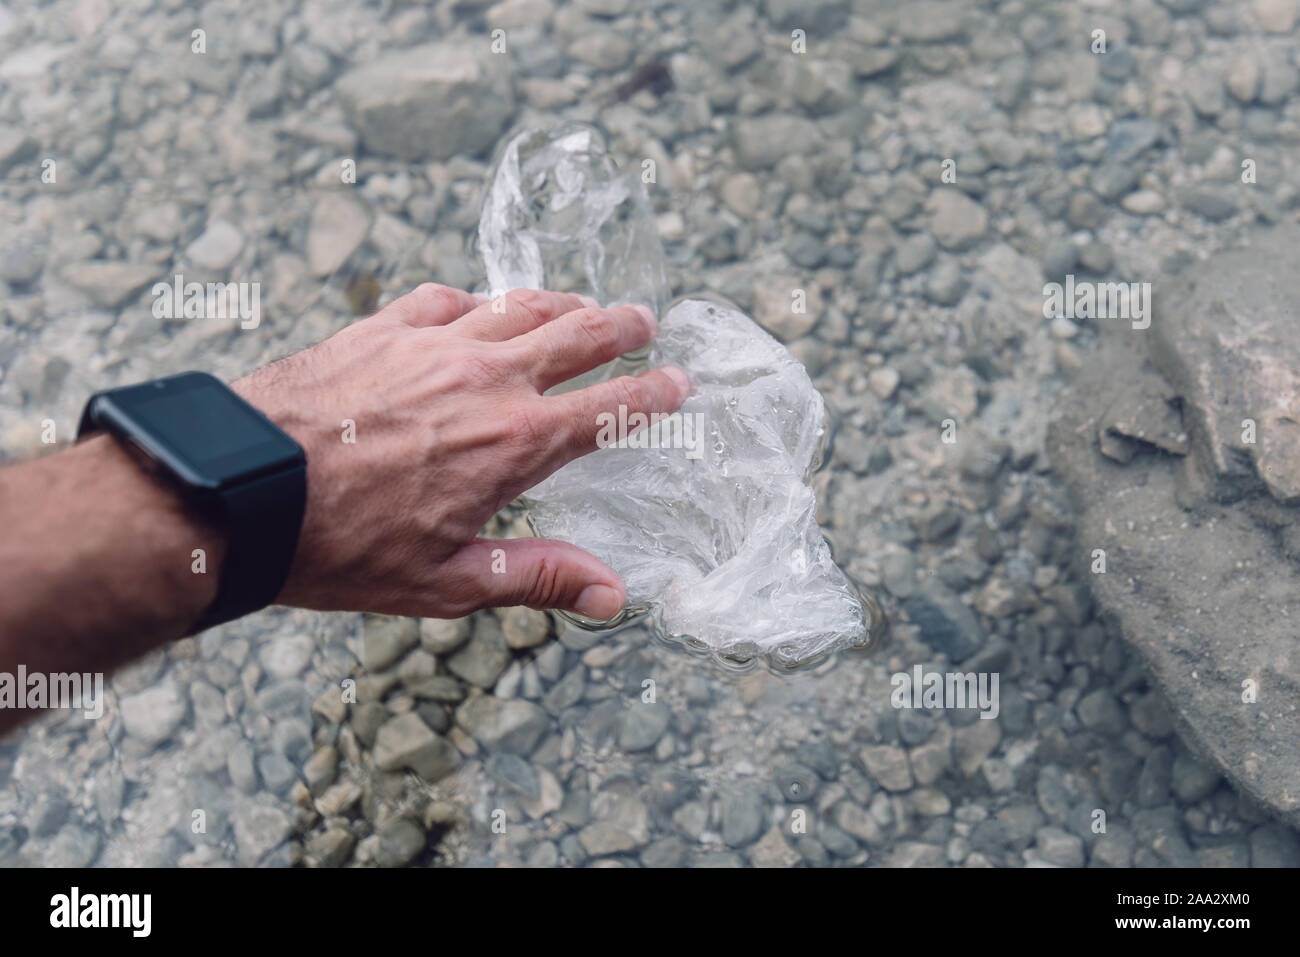 Environmentalist taking plastic bag from water, close up of hand Stock Photo